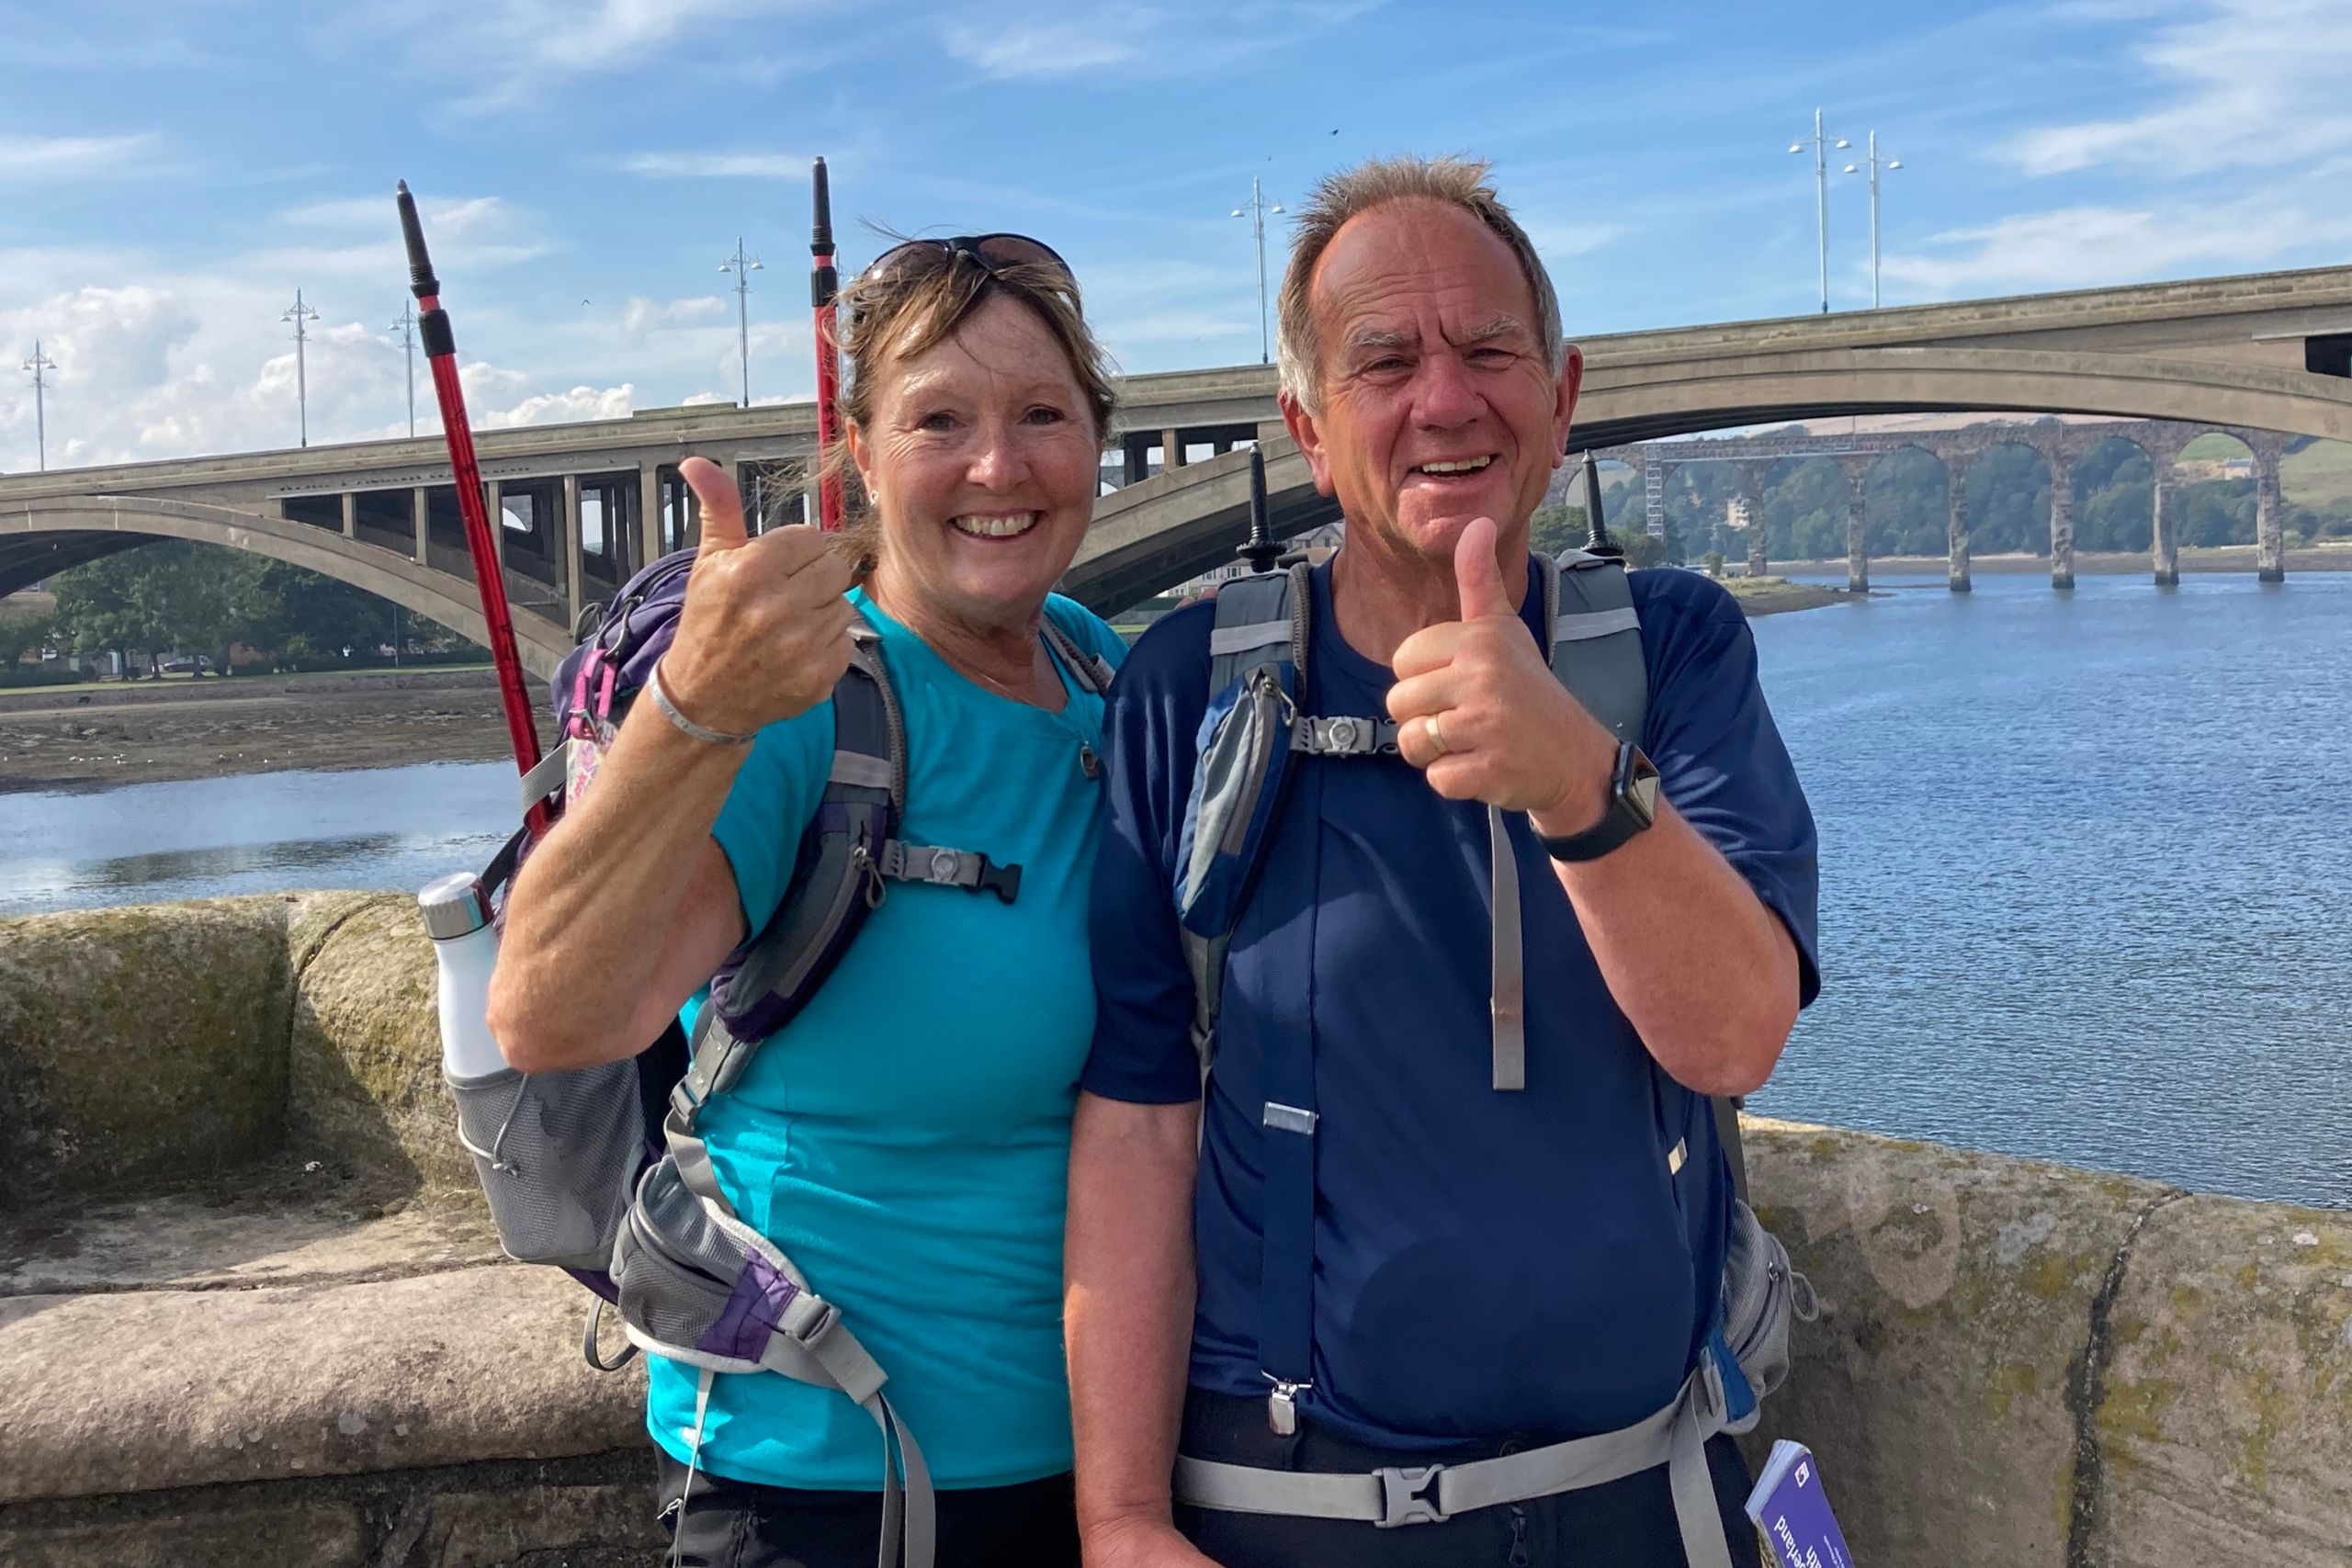 This is a photo of John Cunningham who, along with his wife Wendy, is undertaking the Land's End to John O-Groats challenge, despite having two stomas. It is the header image for his blog on the Urostomy Association website.